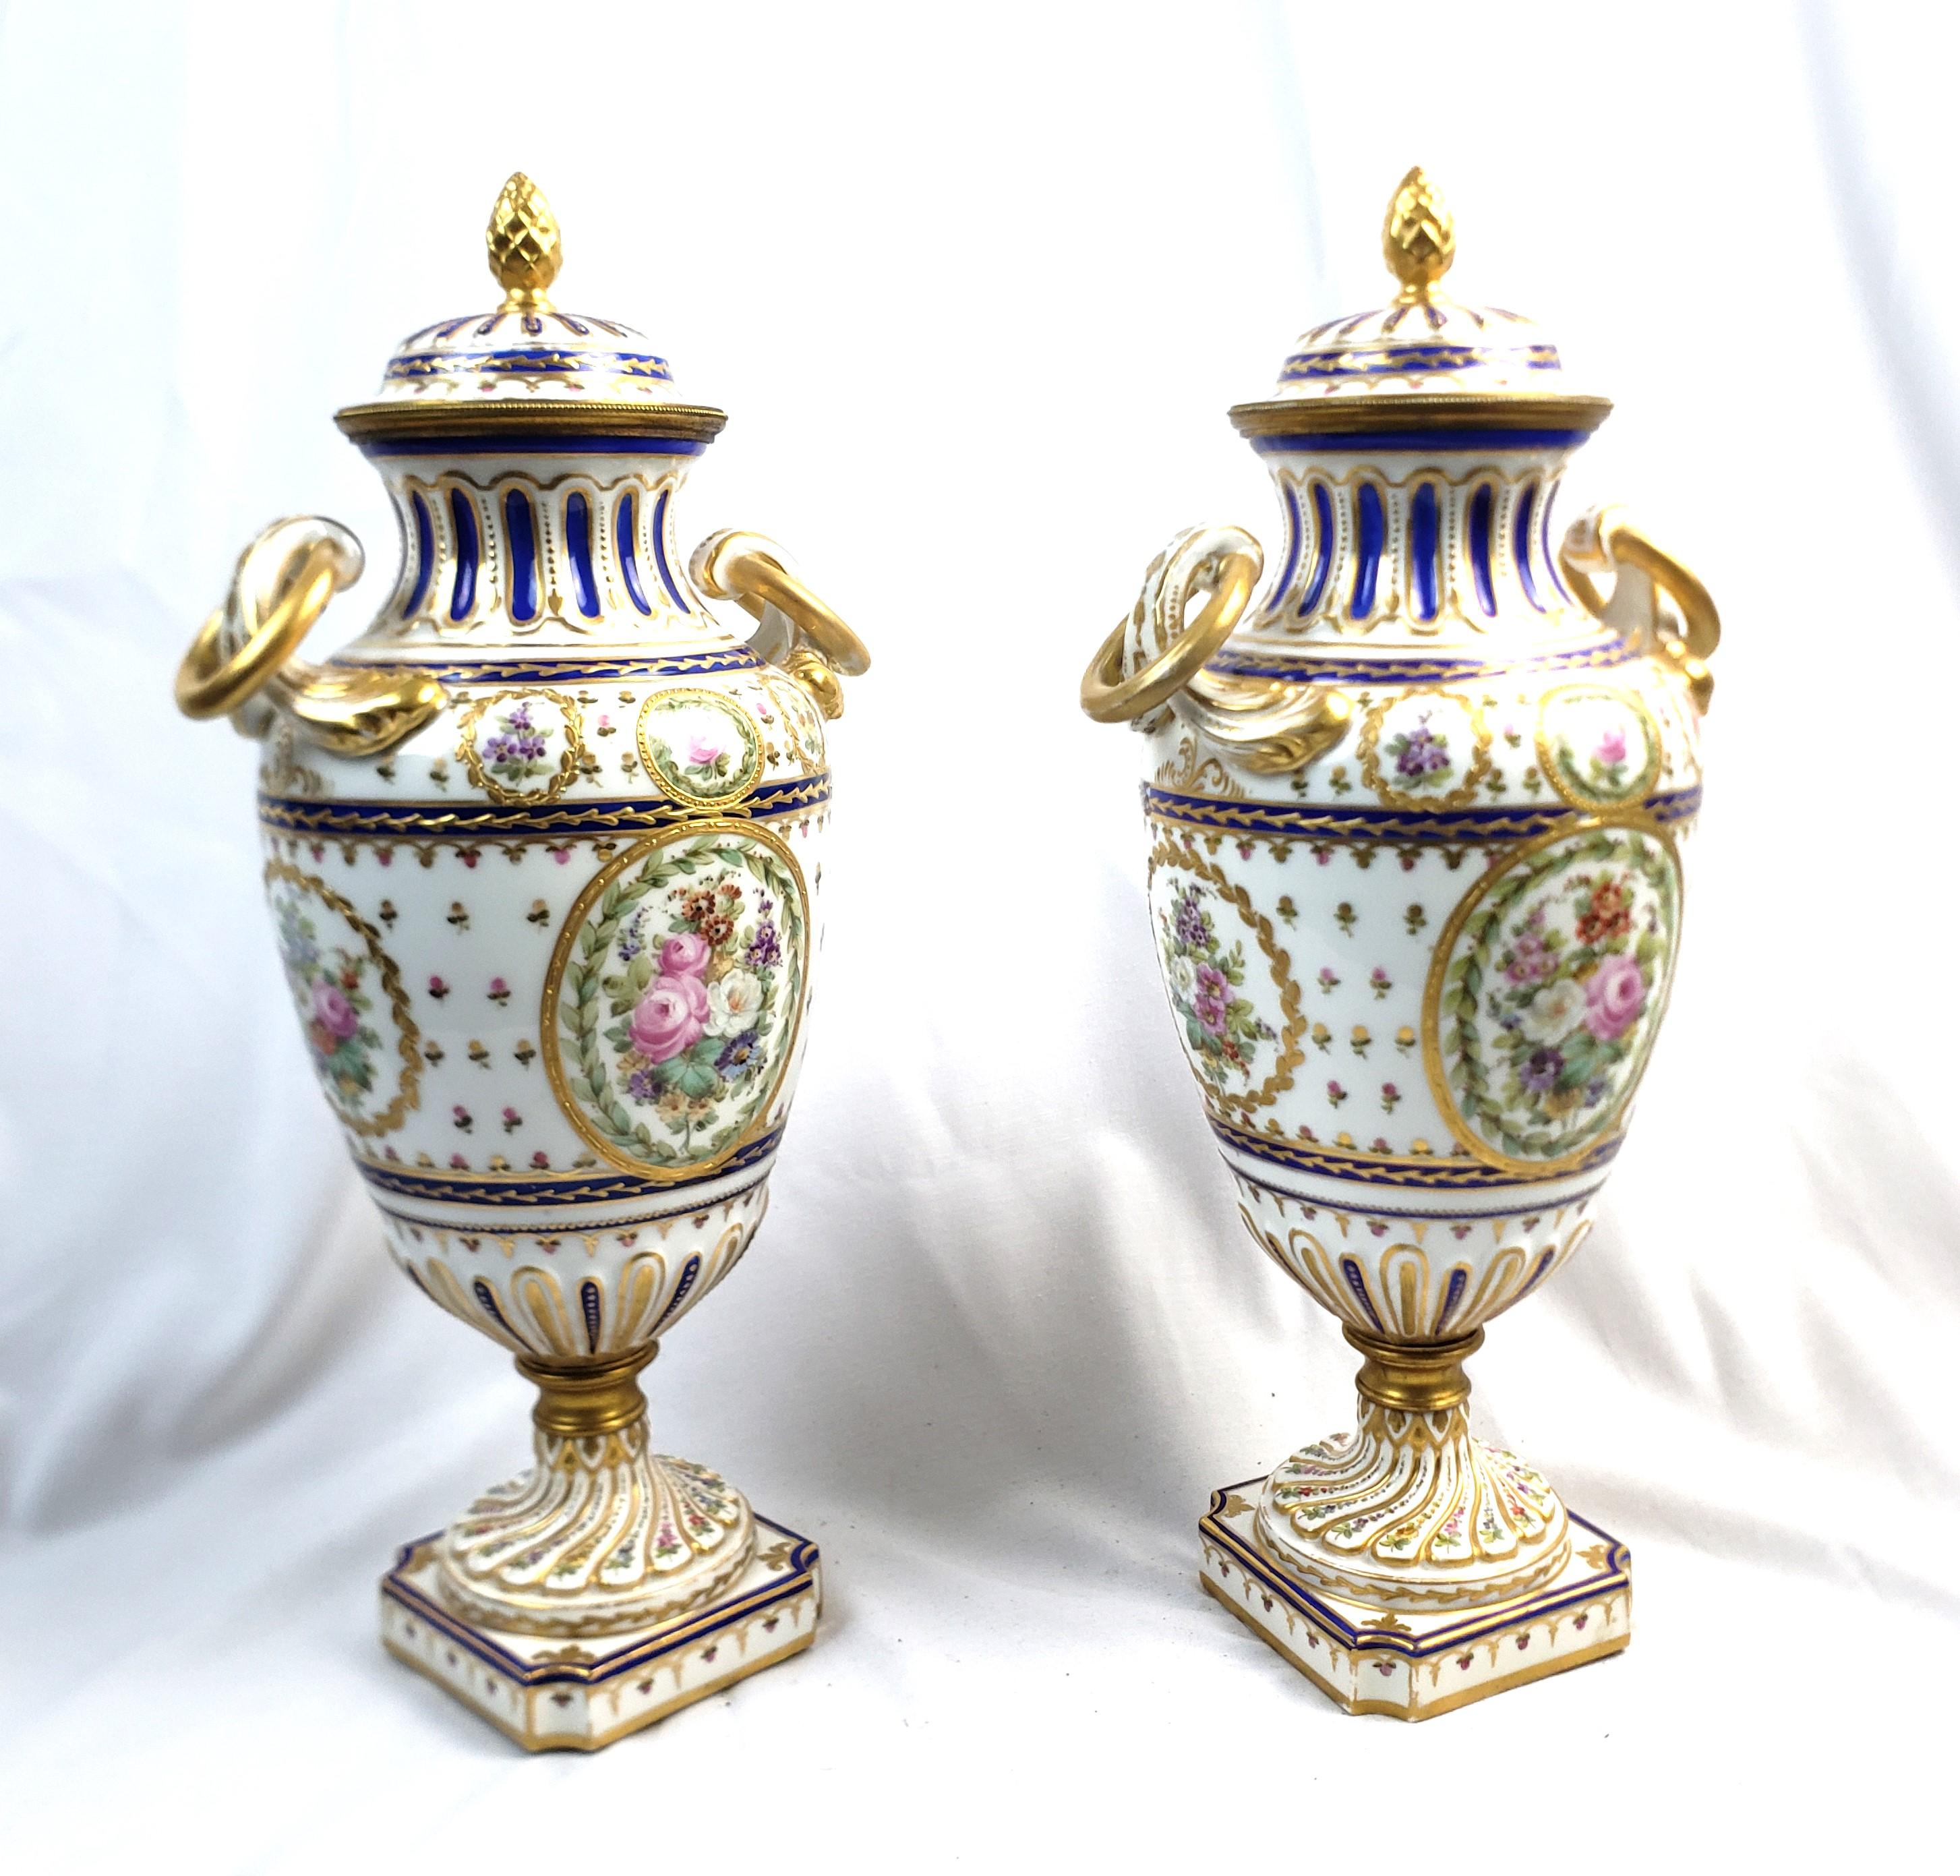 French Pair of Antique Sevres Styled Covered Urns with Ornate Hand-Painted Decoration For Sale